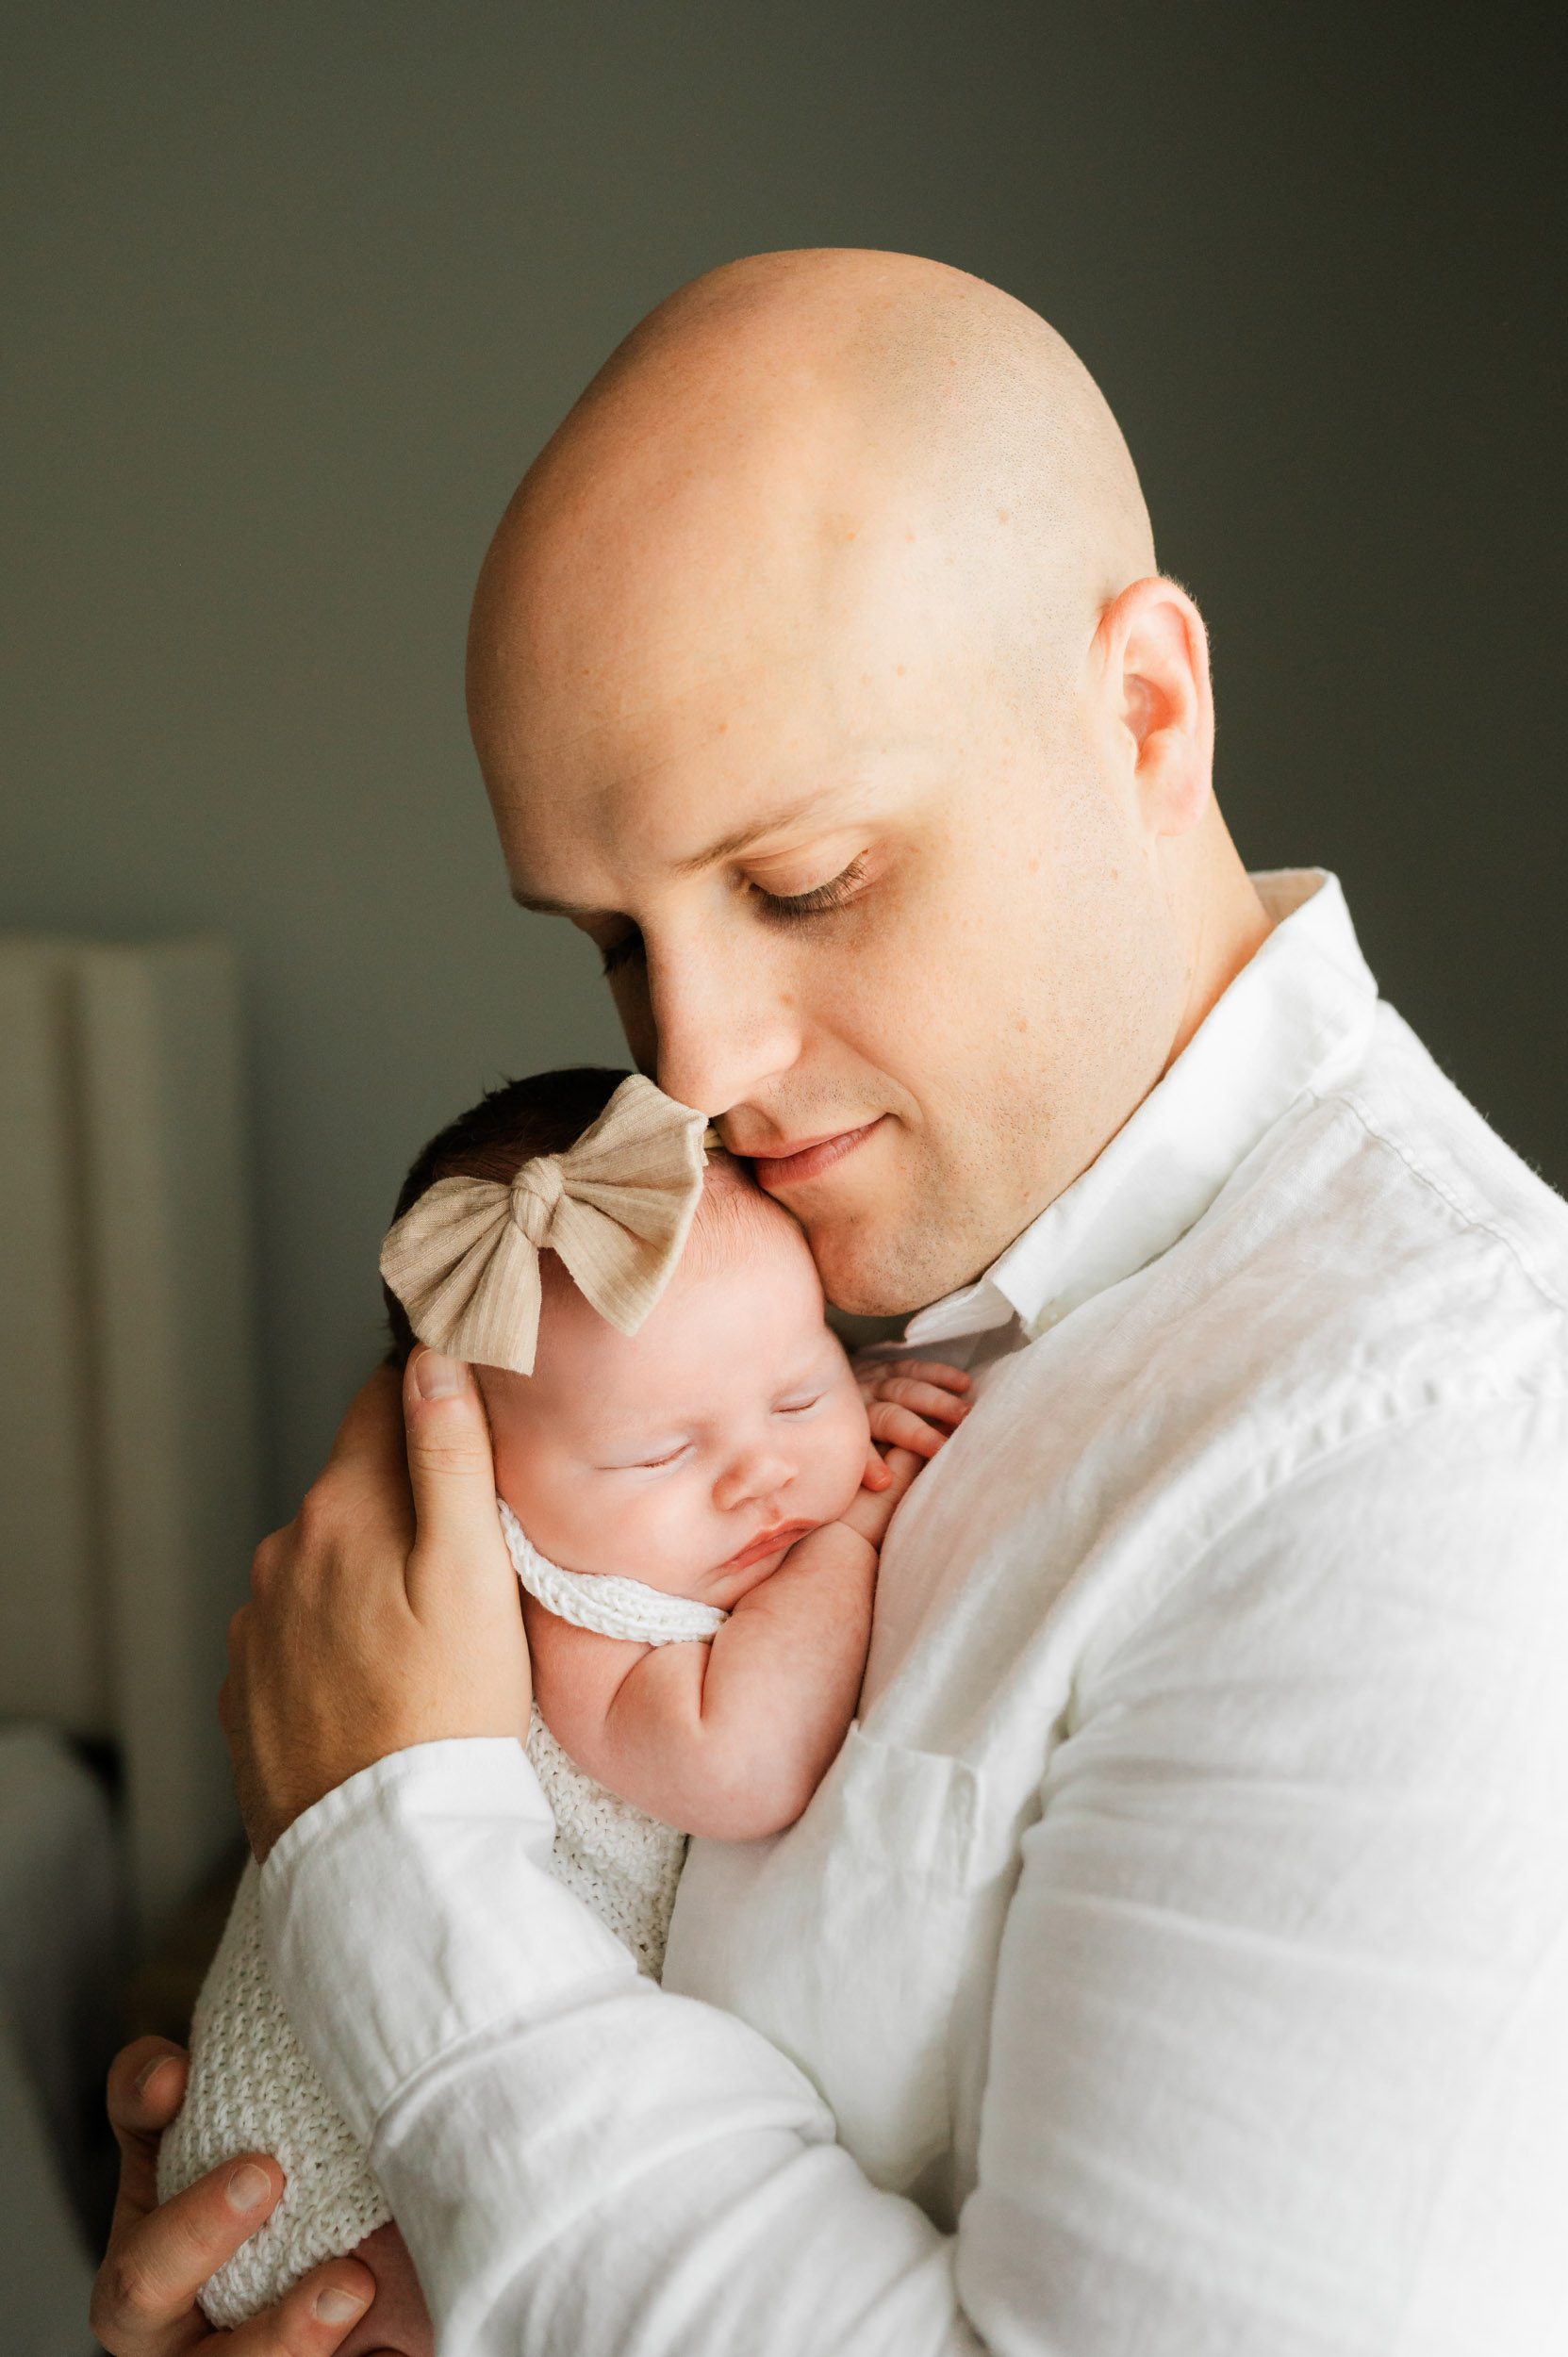 a baby girl wearing a textured white romper and beige bow headband sleeping peacefully snuggled up against her dad's chest as he smiles down at her during a Collegeville newborn photo session